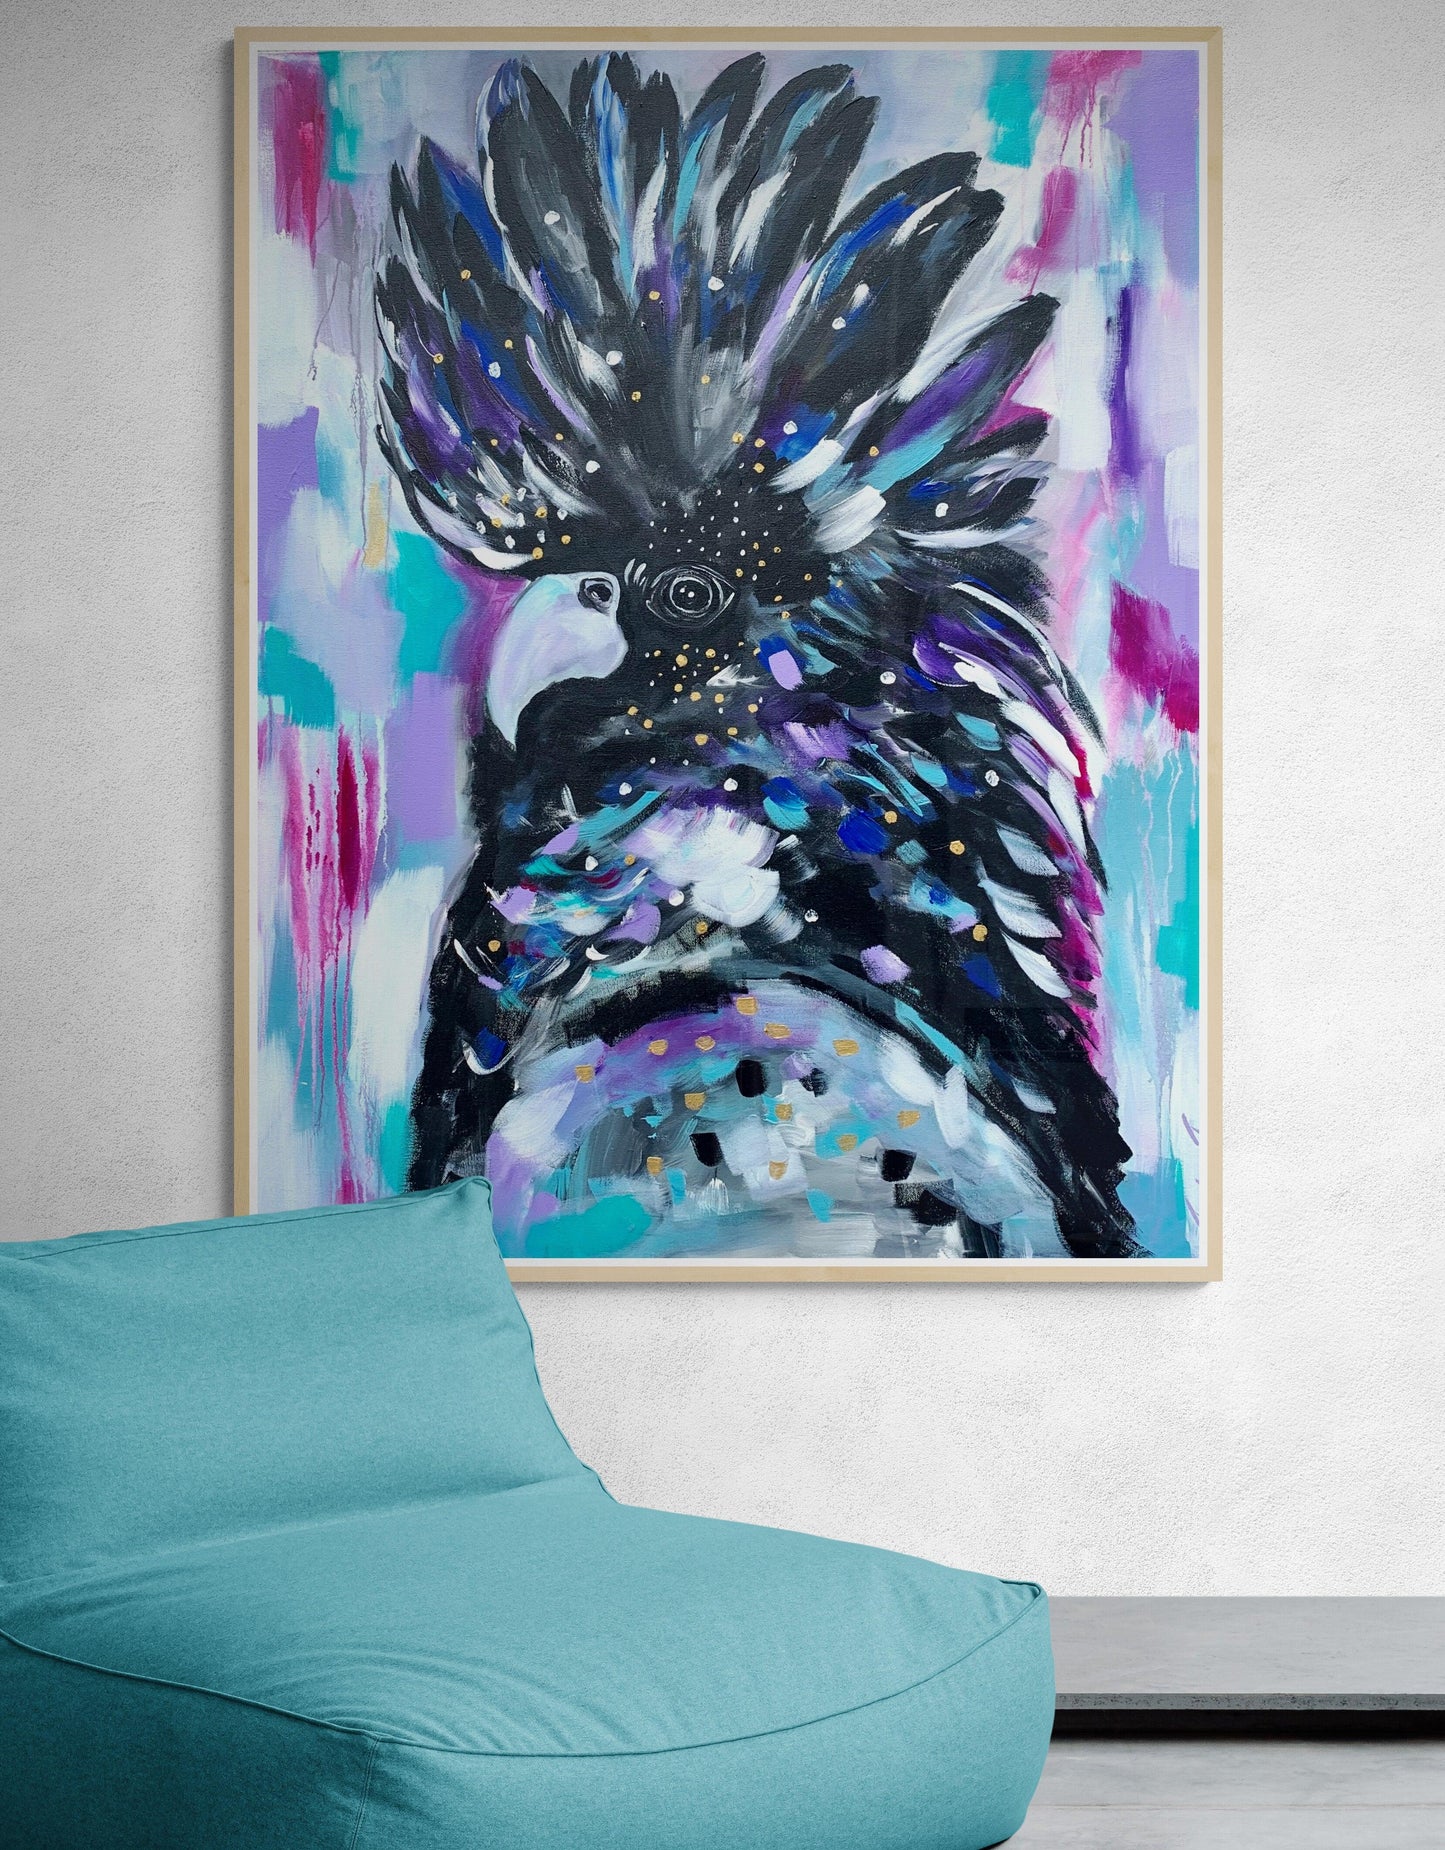 Striking Black Cockatoo - 1mx - 800 - Original Artwork - Available by commission